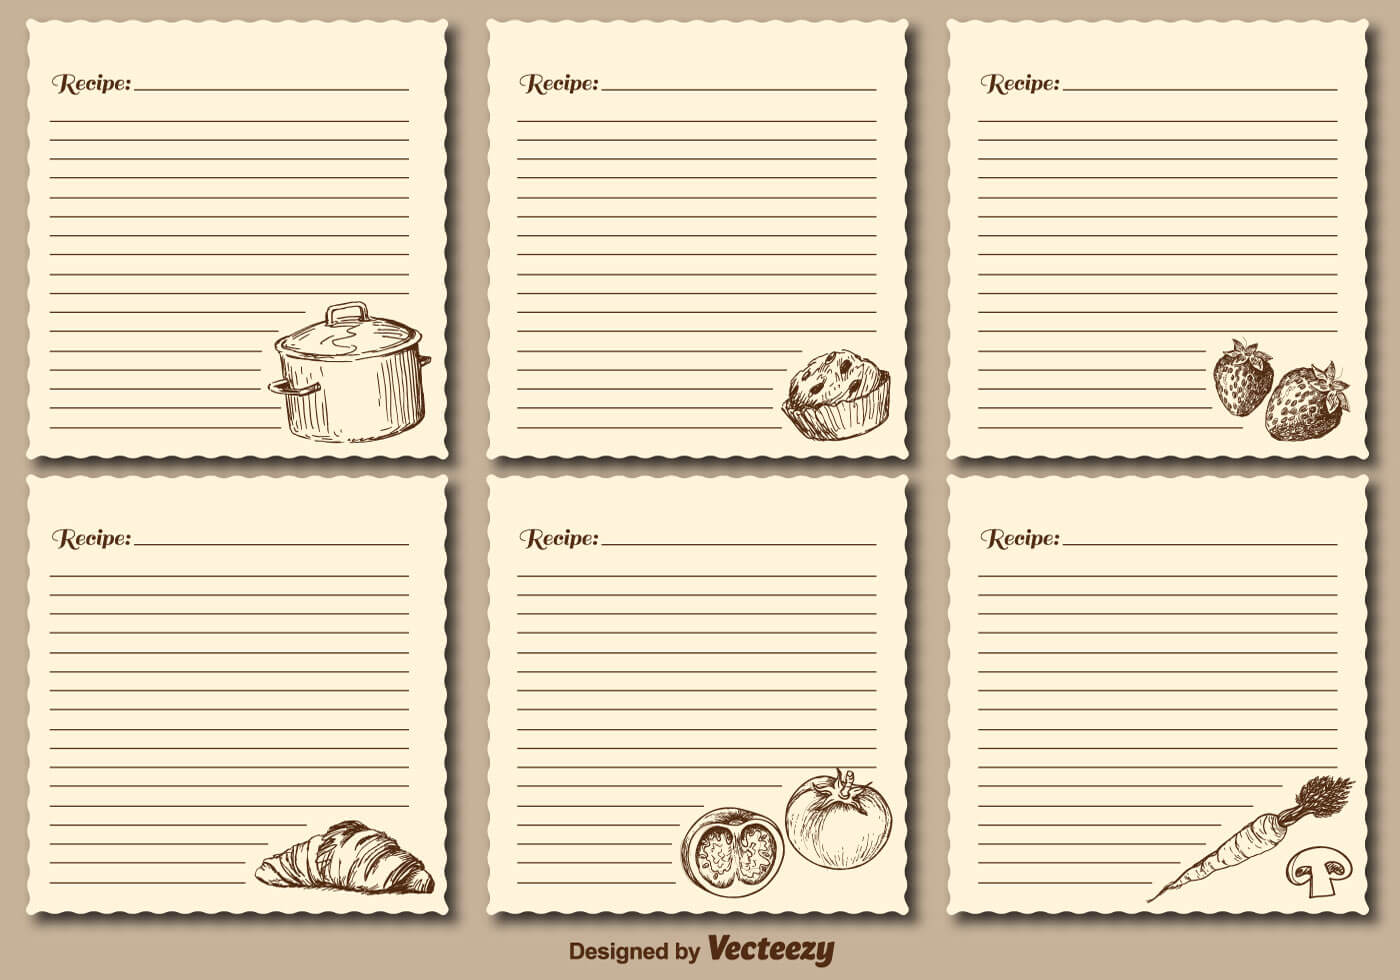 Recipe Cards Free Vector Art – (659 Free Downloads) Throughout Restaurant Recipe Card Template